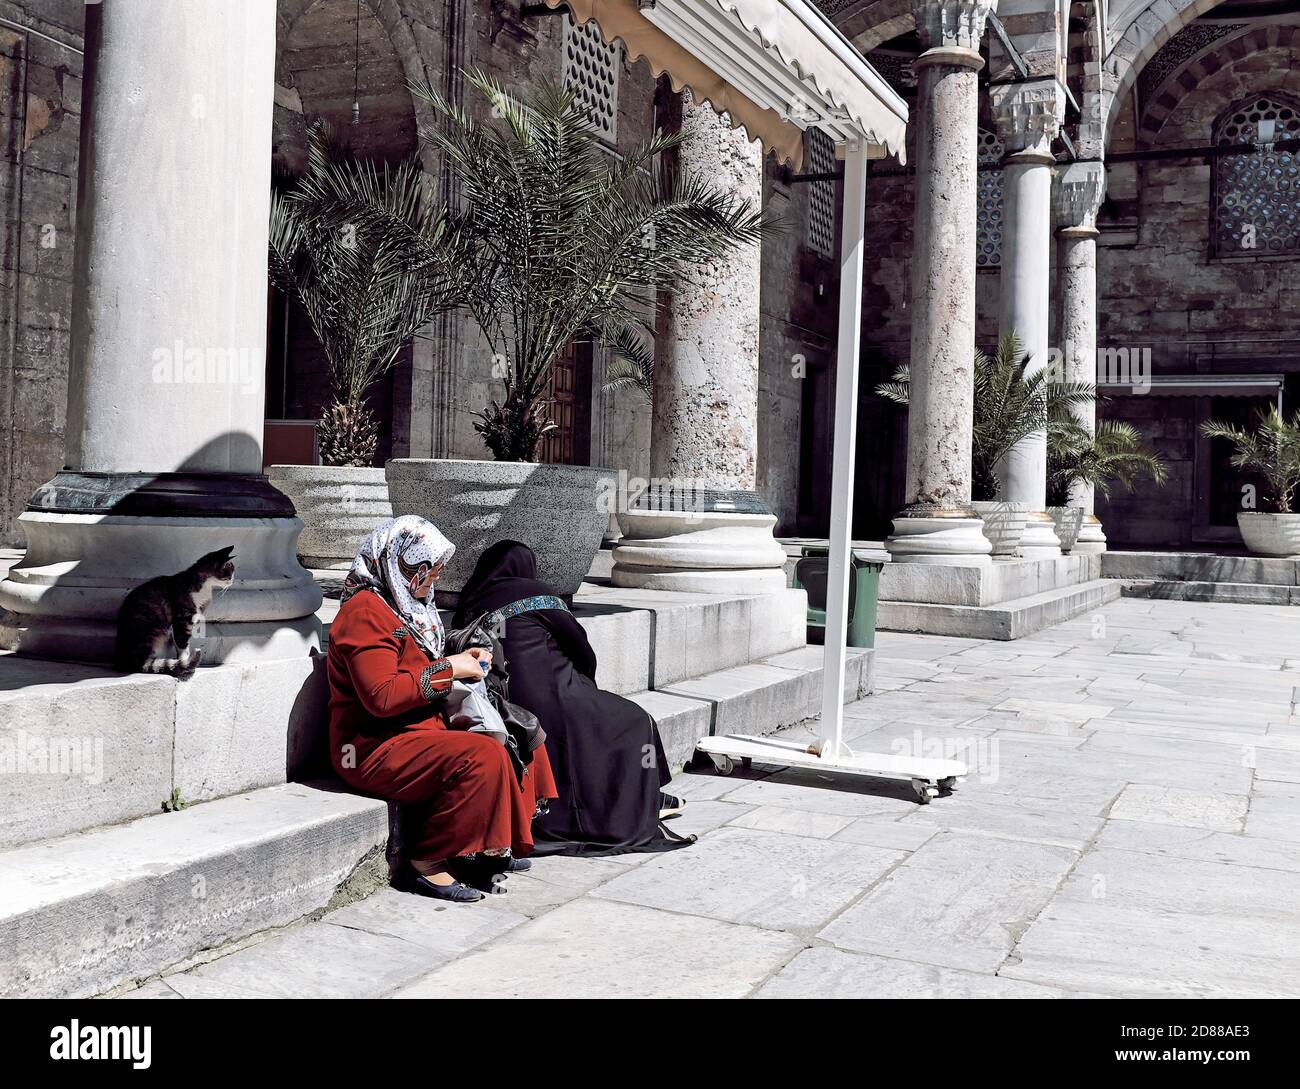 A cat hangs out with two older women dressed in abaya and hijab in the courtyard outside a mosque in Istanbul, Turkey. Stock Photo